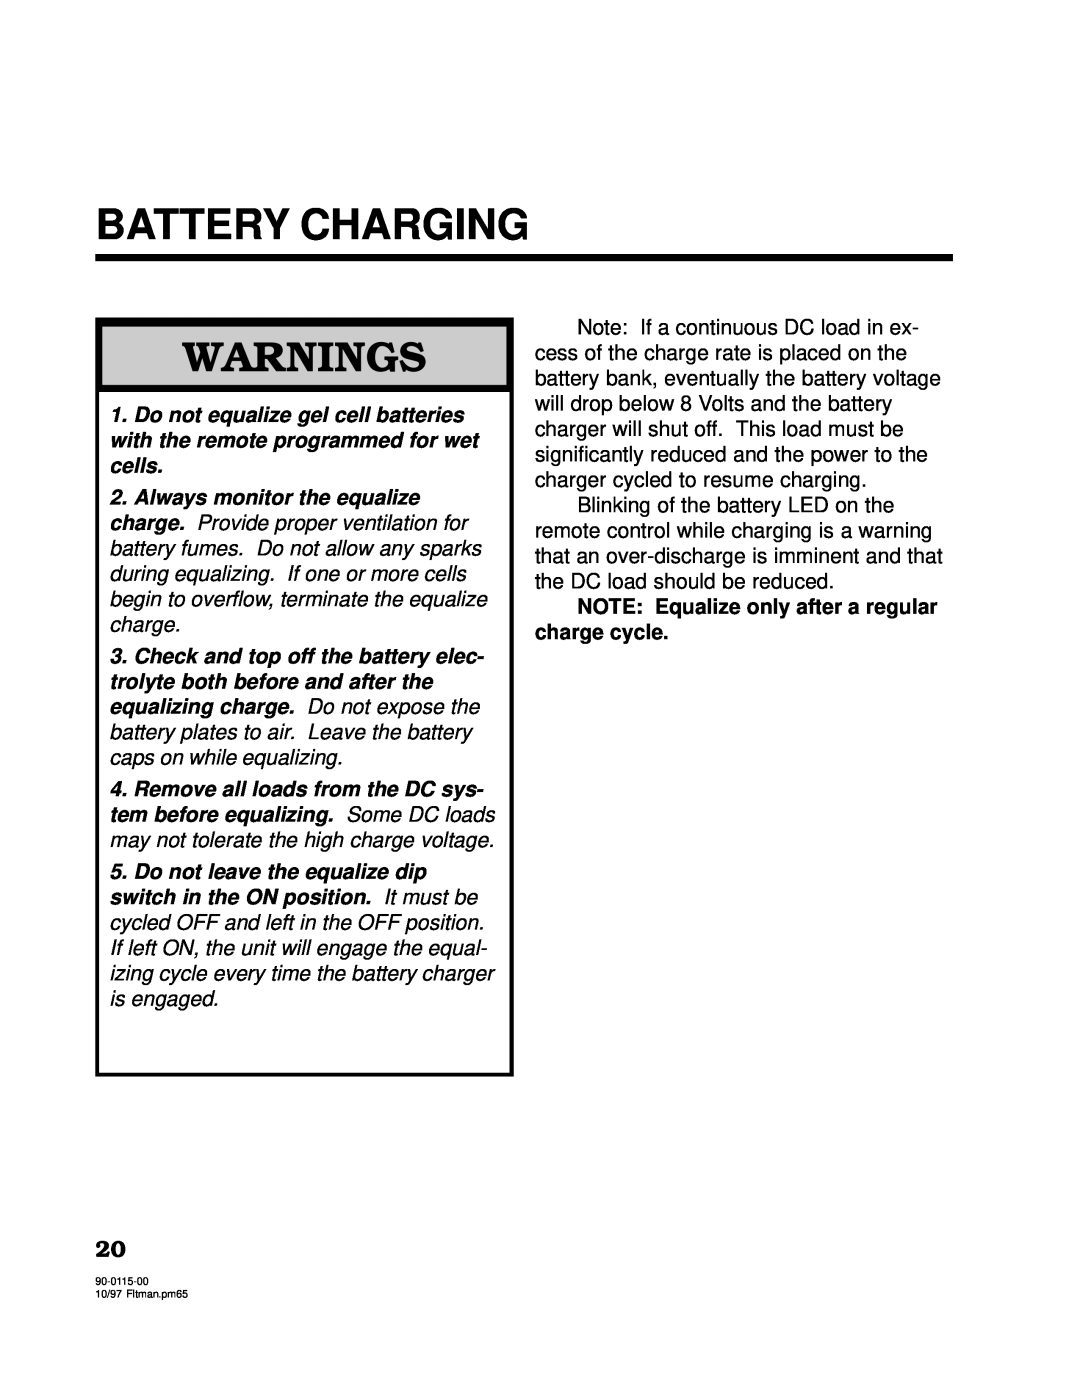 Xantrex Technology 2500, 2000 owner manual Battery Charging, Warnings, NOTE: Equalize only after a regular charge cycle 